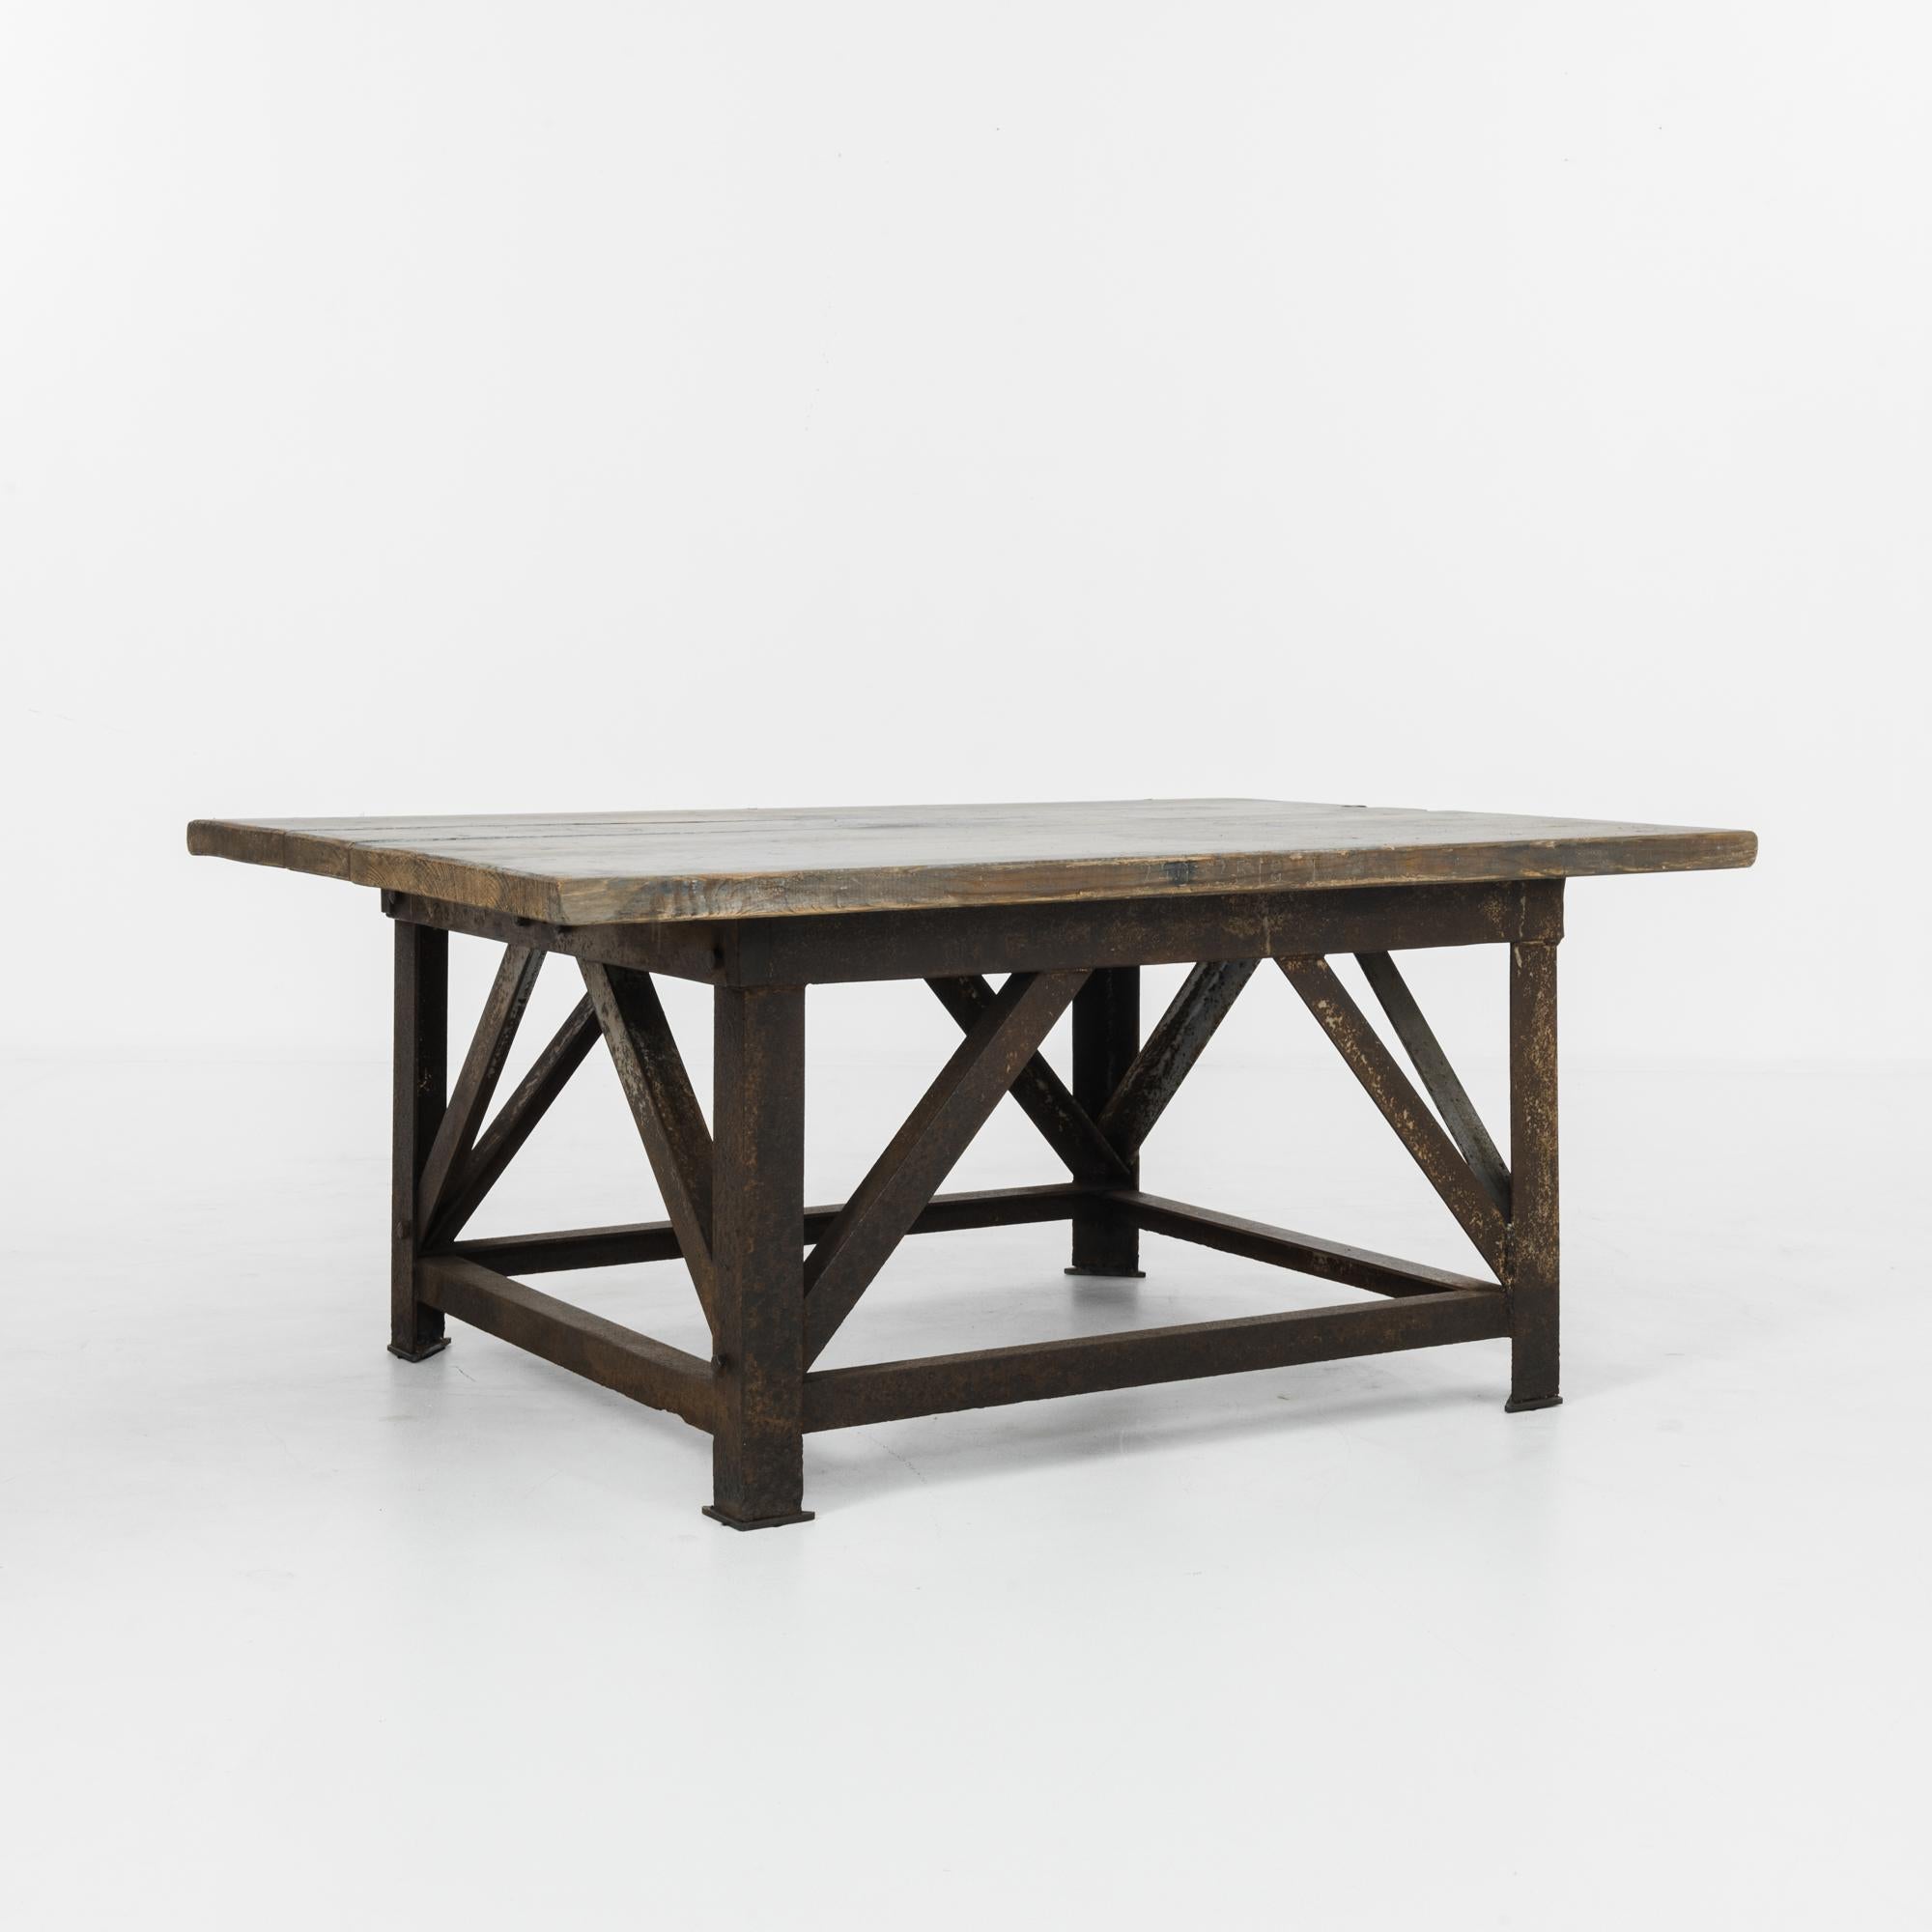 A table from 1950s Czechia with an industrial aesthetic. A rectangular tabletop of wooden boards rests atop an iron base; the reddish, oxidized hue of the metal and the natural finish of the wood make for a pleasing contrast of materials. The